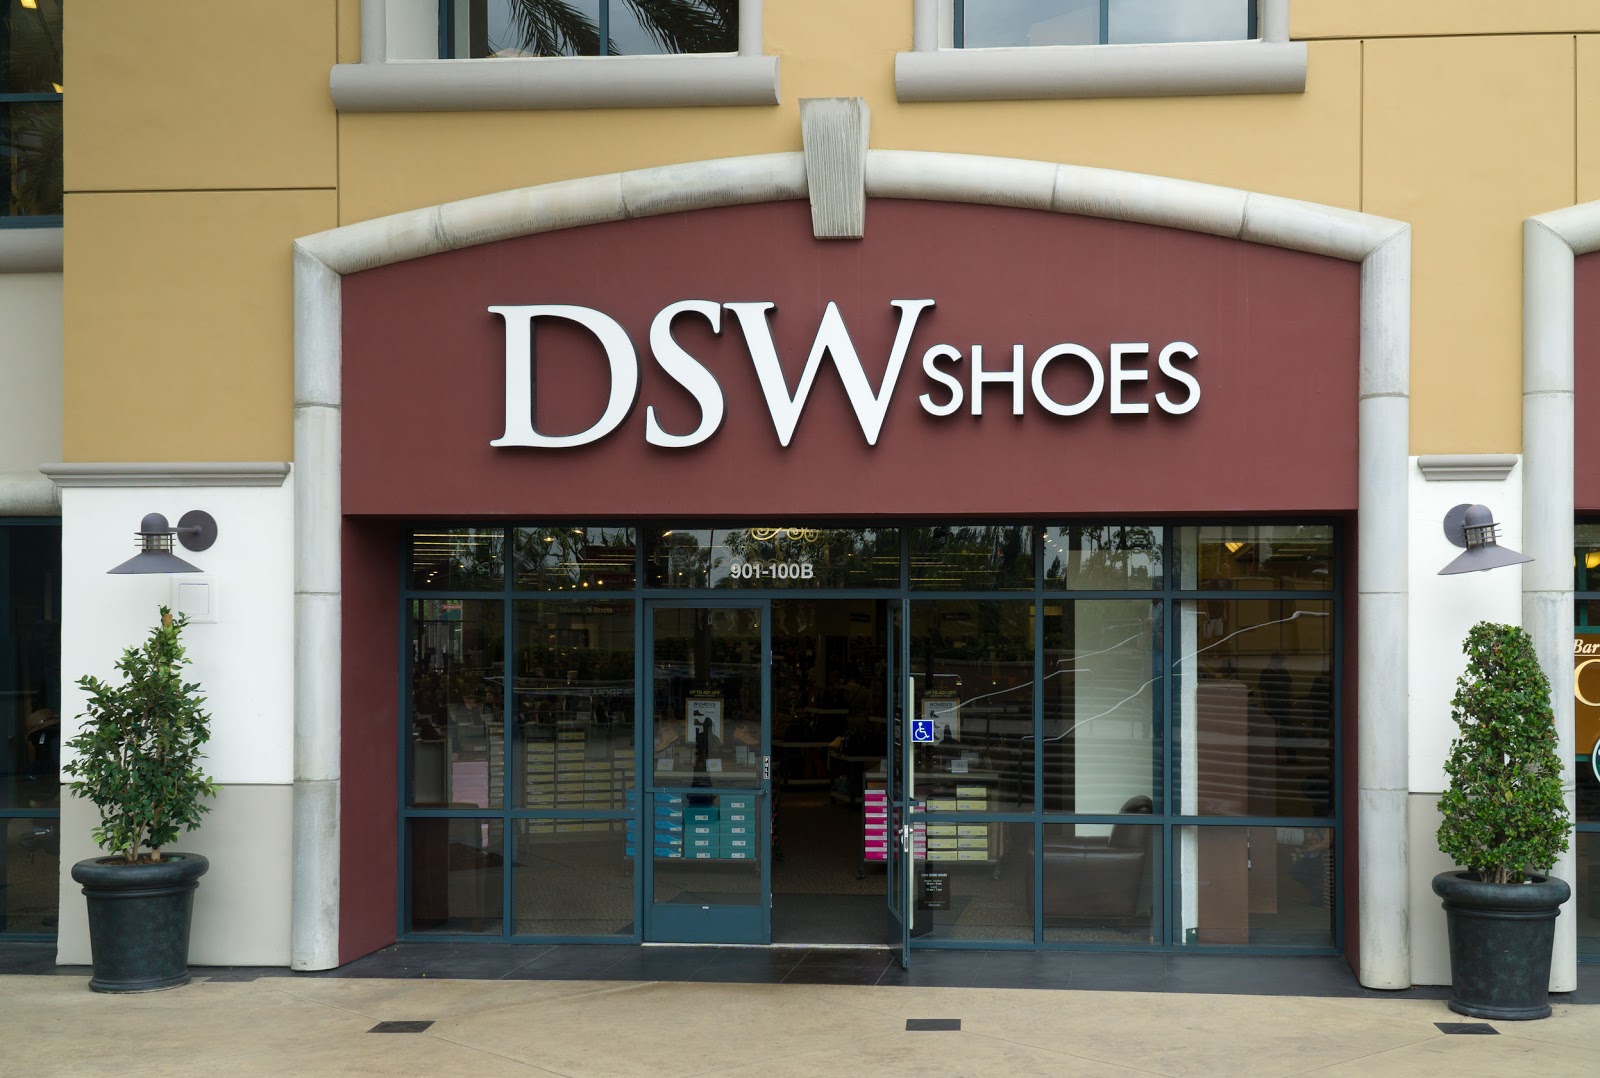 16 Savings Tips to Stretch your Budget at DSW